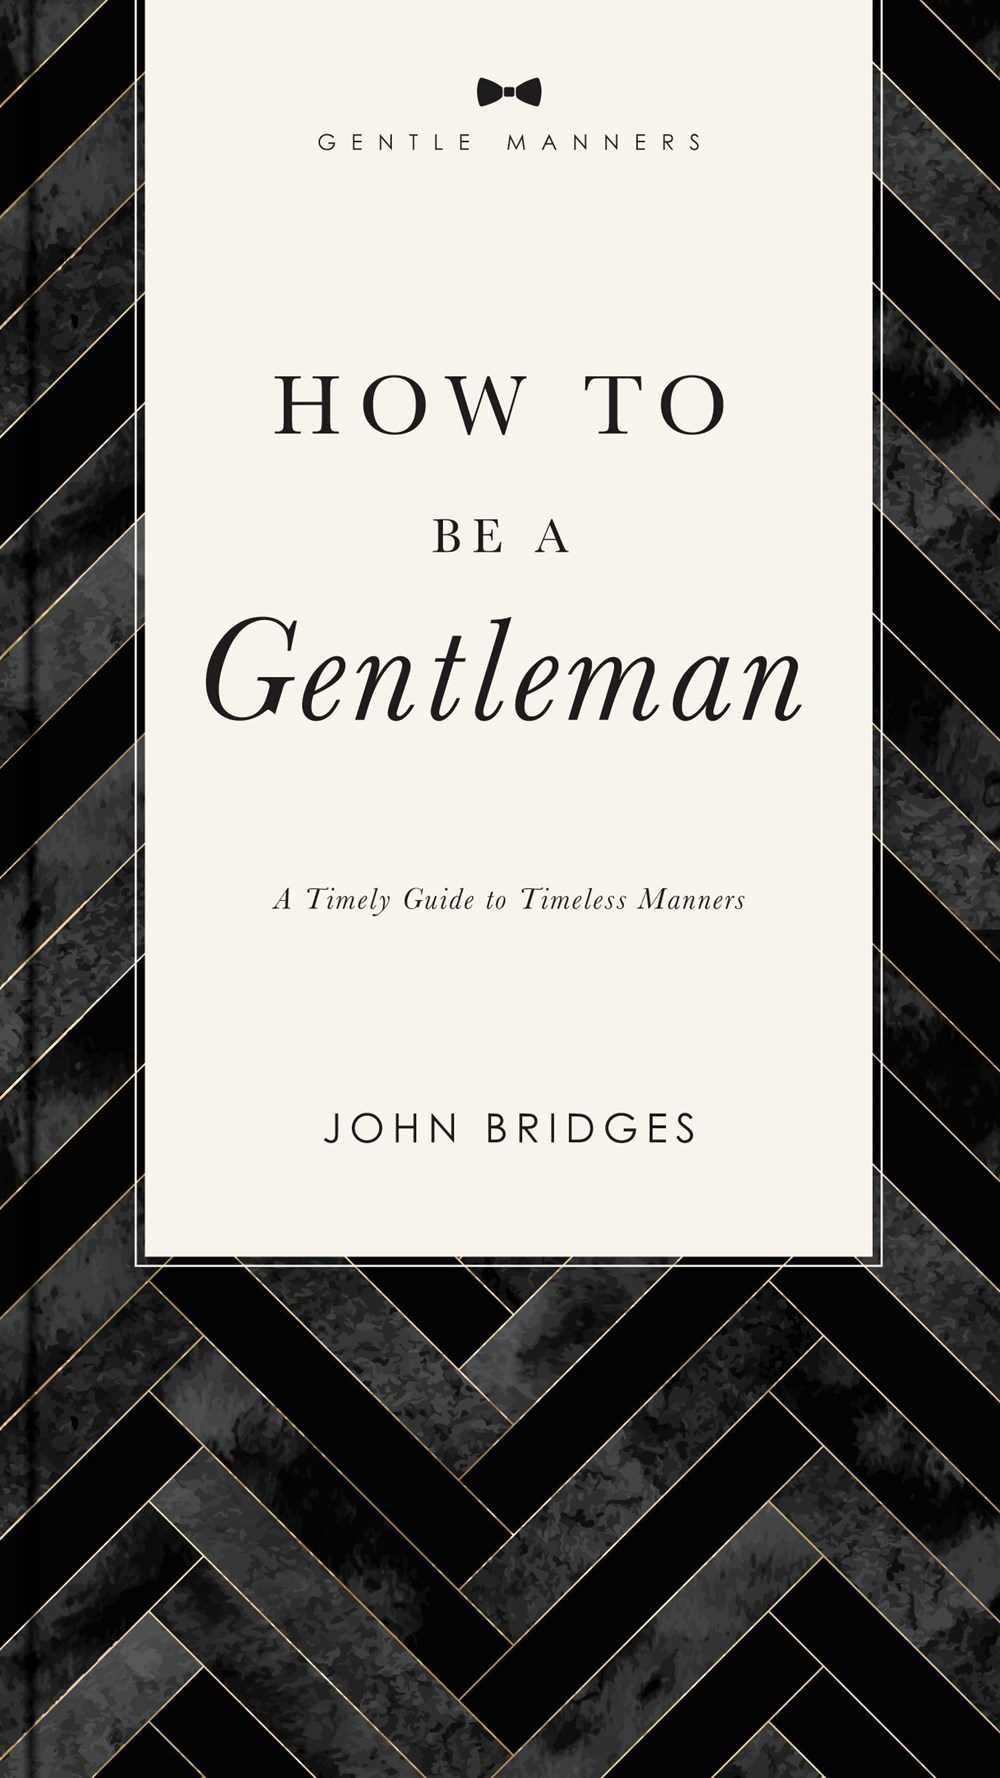 How to Be a Gentleman (Revised and Expanded)